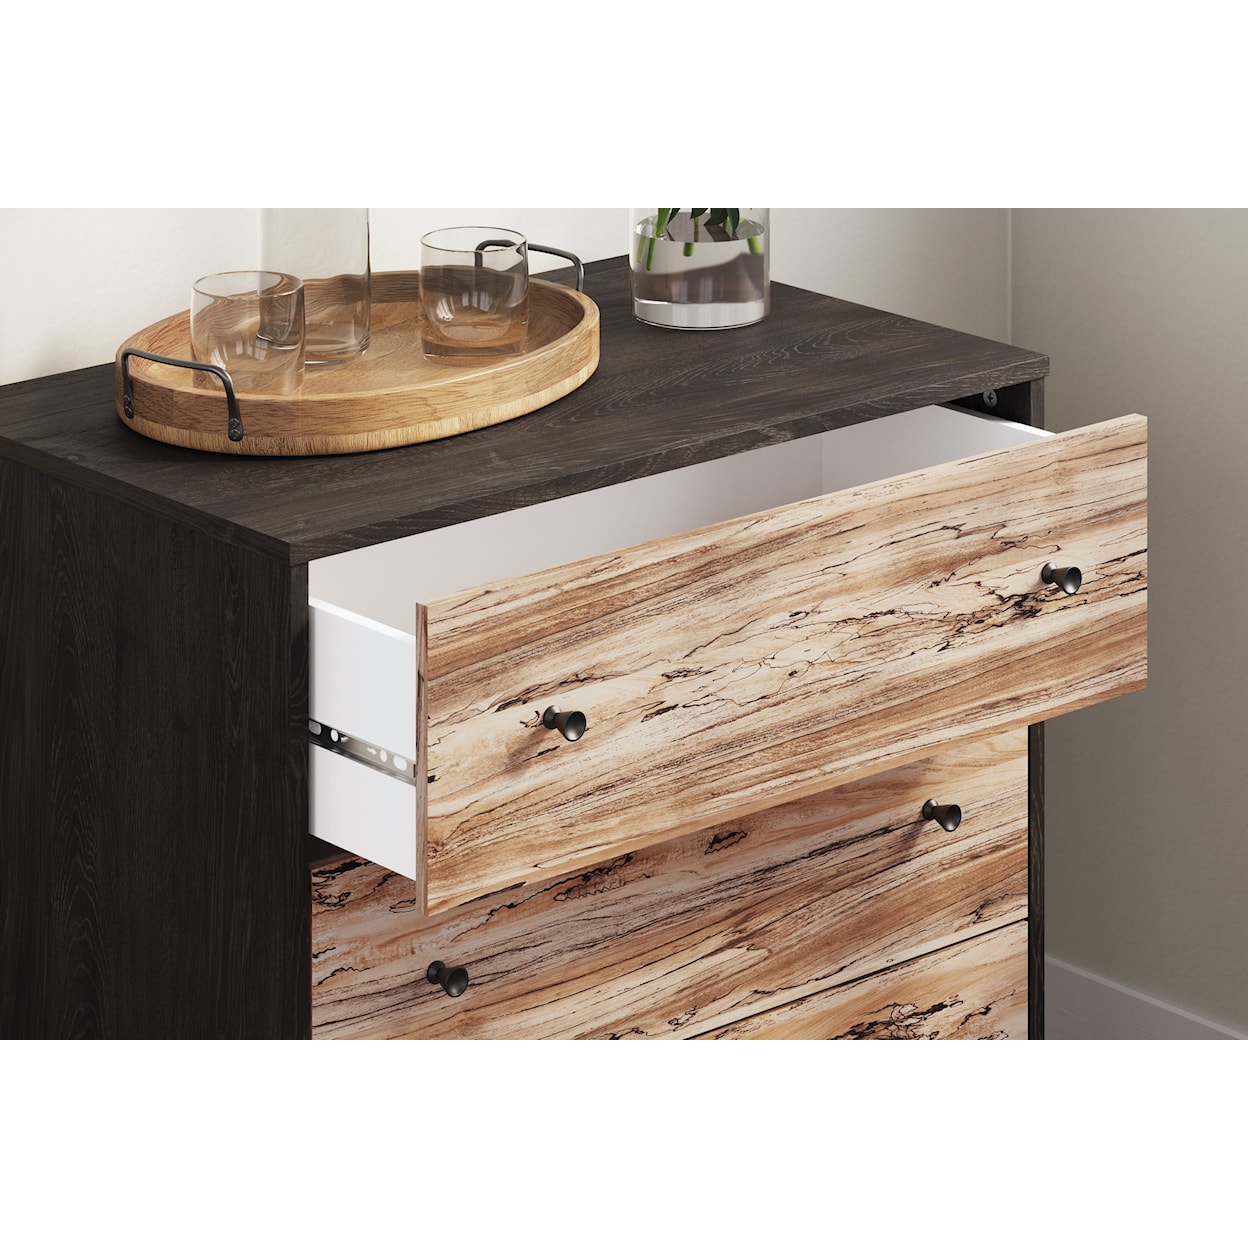 Benchcraft Lannover Chest of Drawers